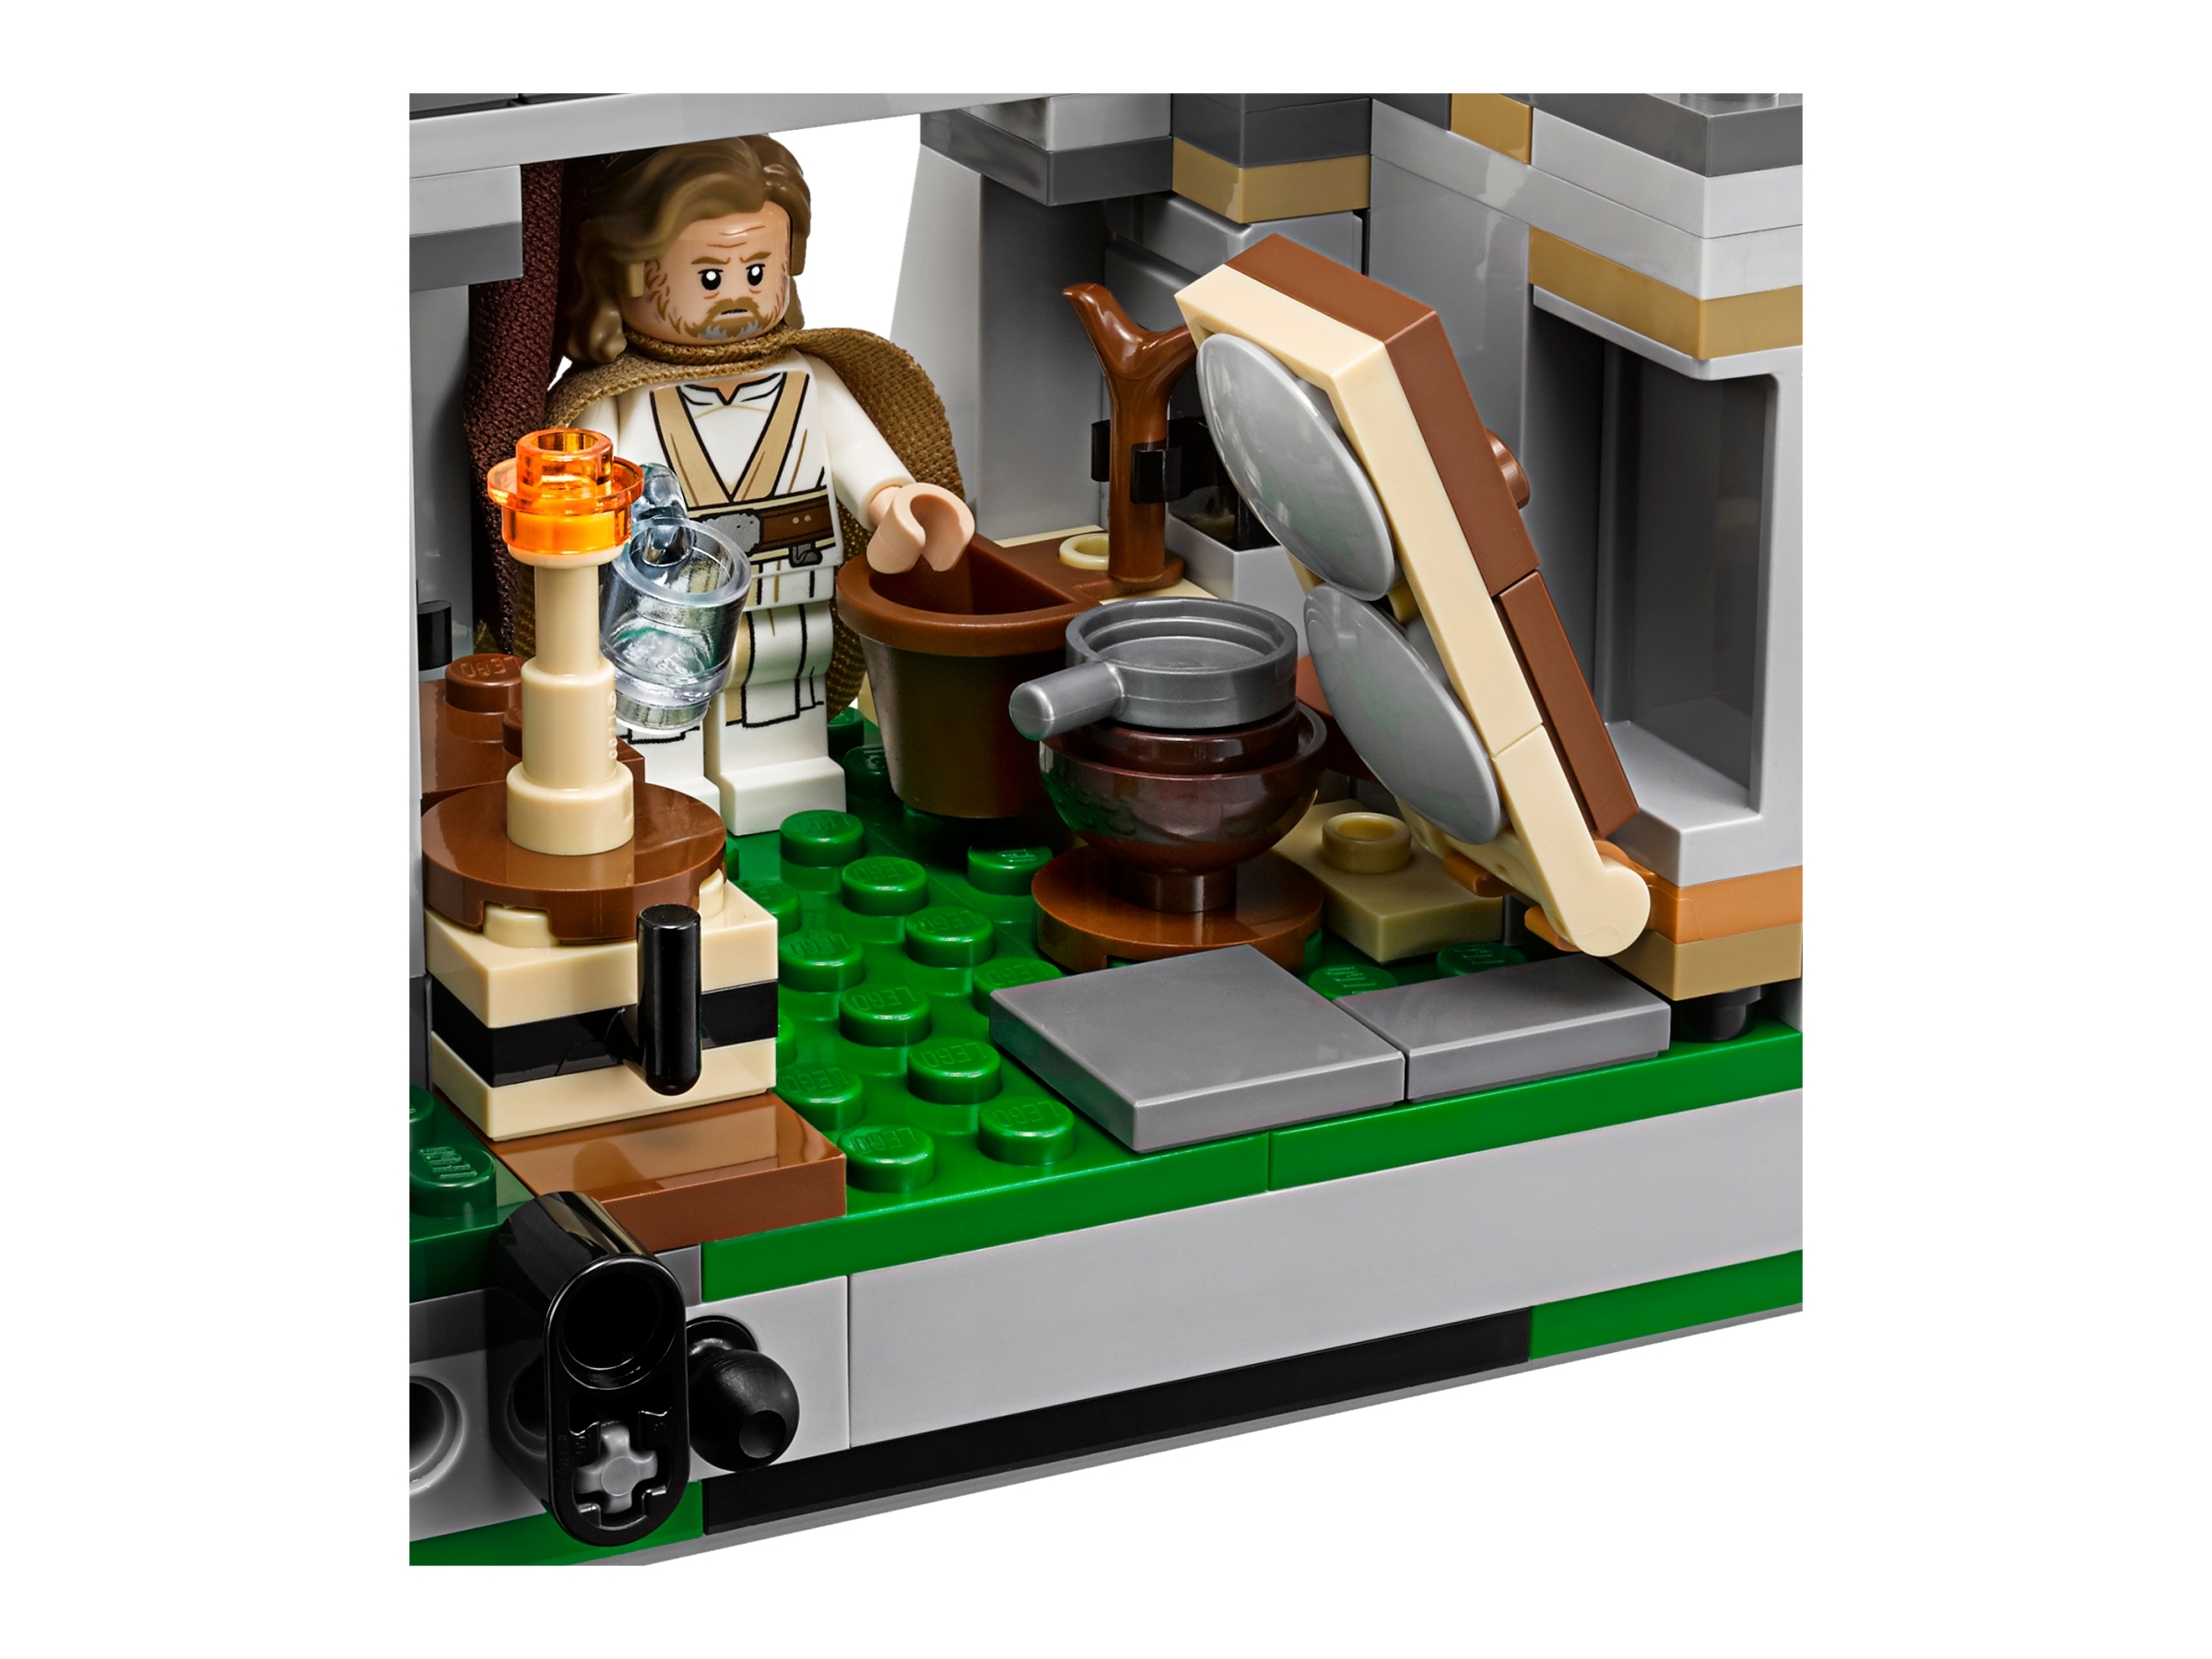 LEGO Star Wars Ahch-To Island Training (75200) Review - The Brick Fan